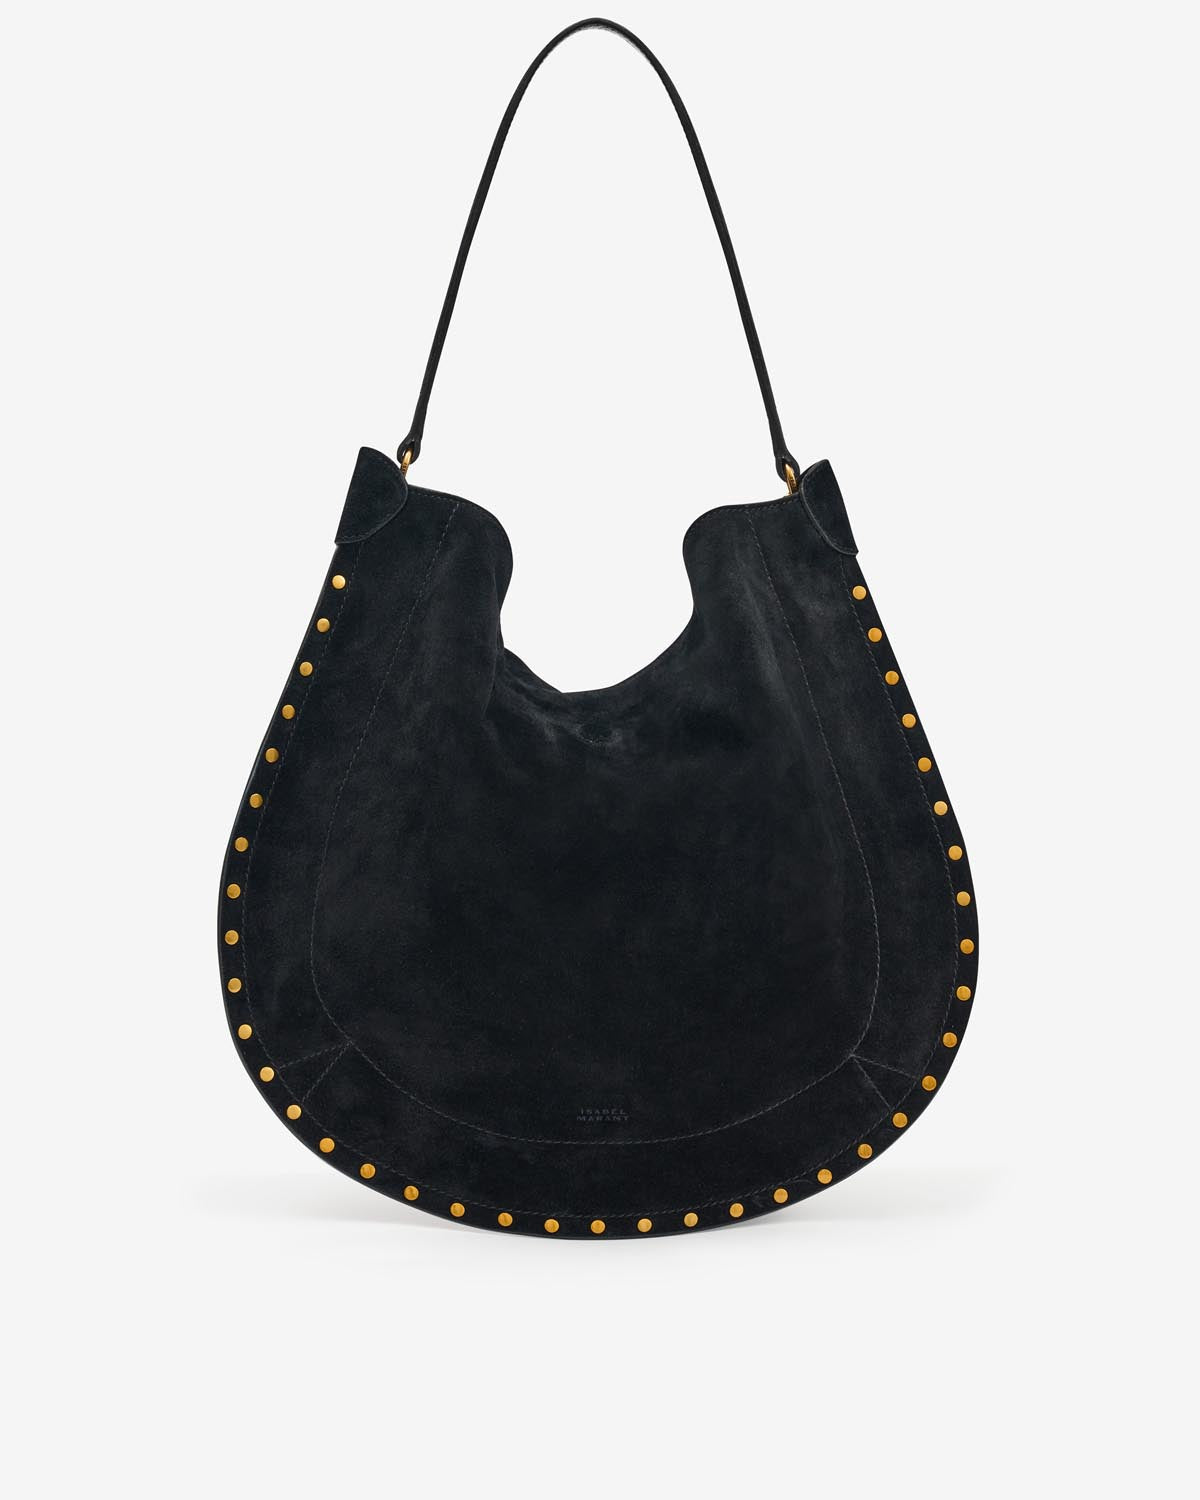 Bags Woman and Man | ISABEL MARANT Official Online Store